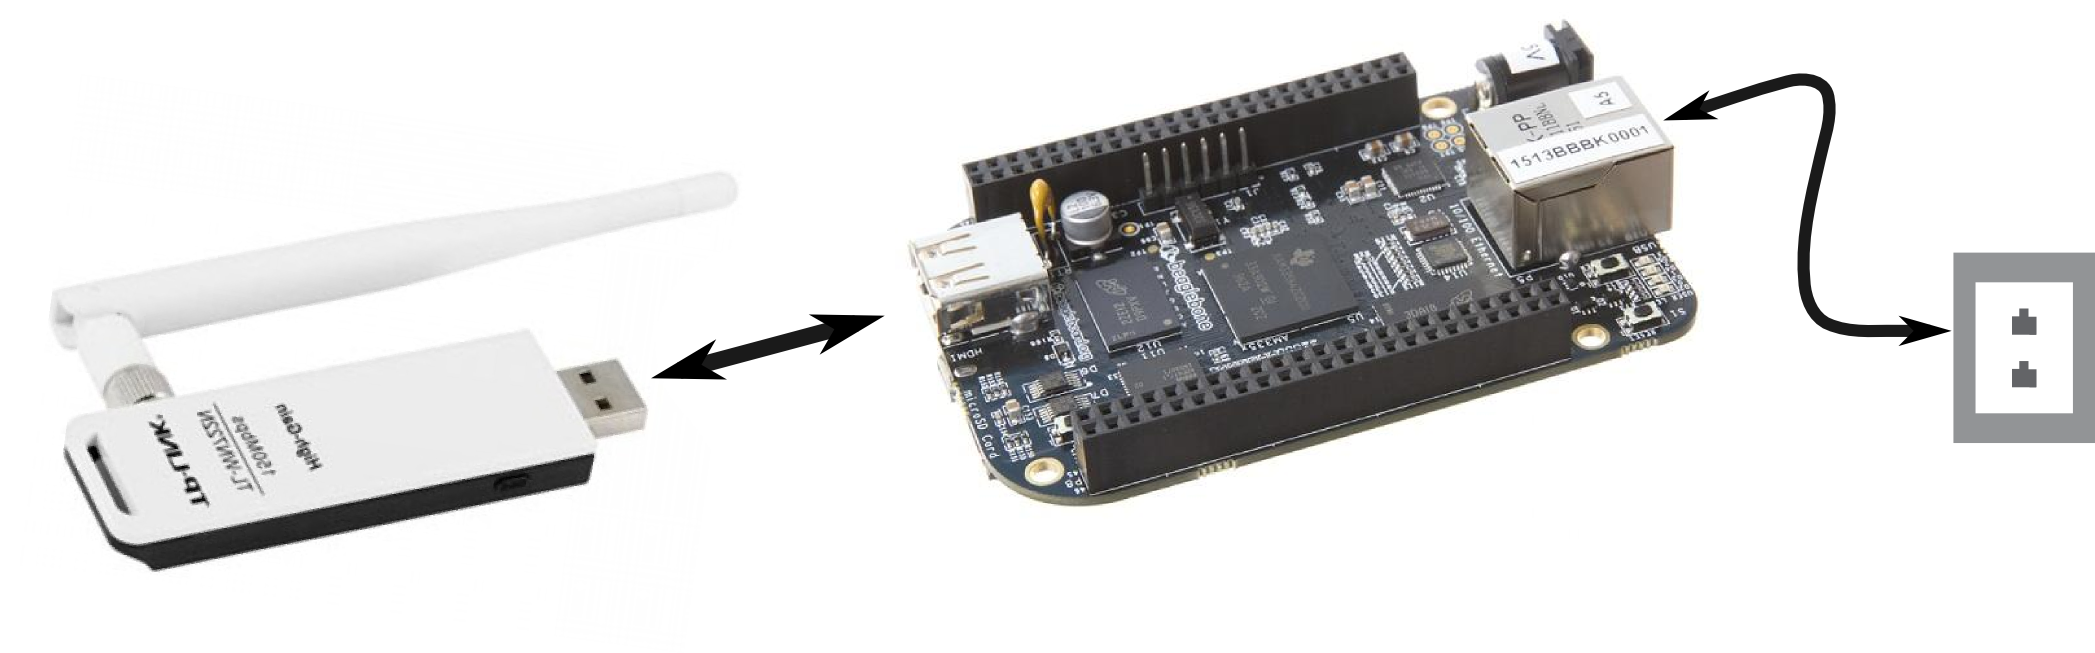 BeagleBone Black Being connected to an antenna and ethernet jack